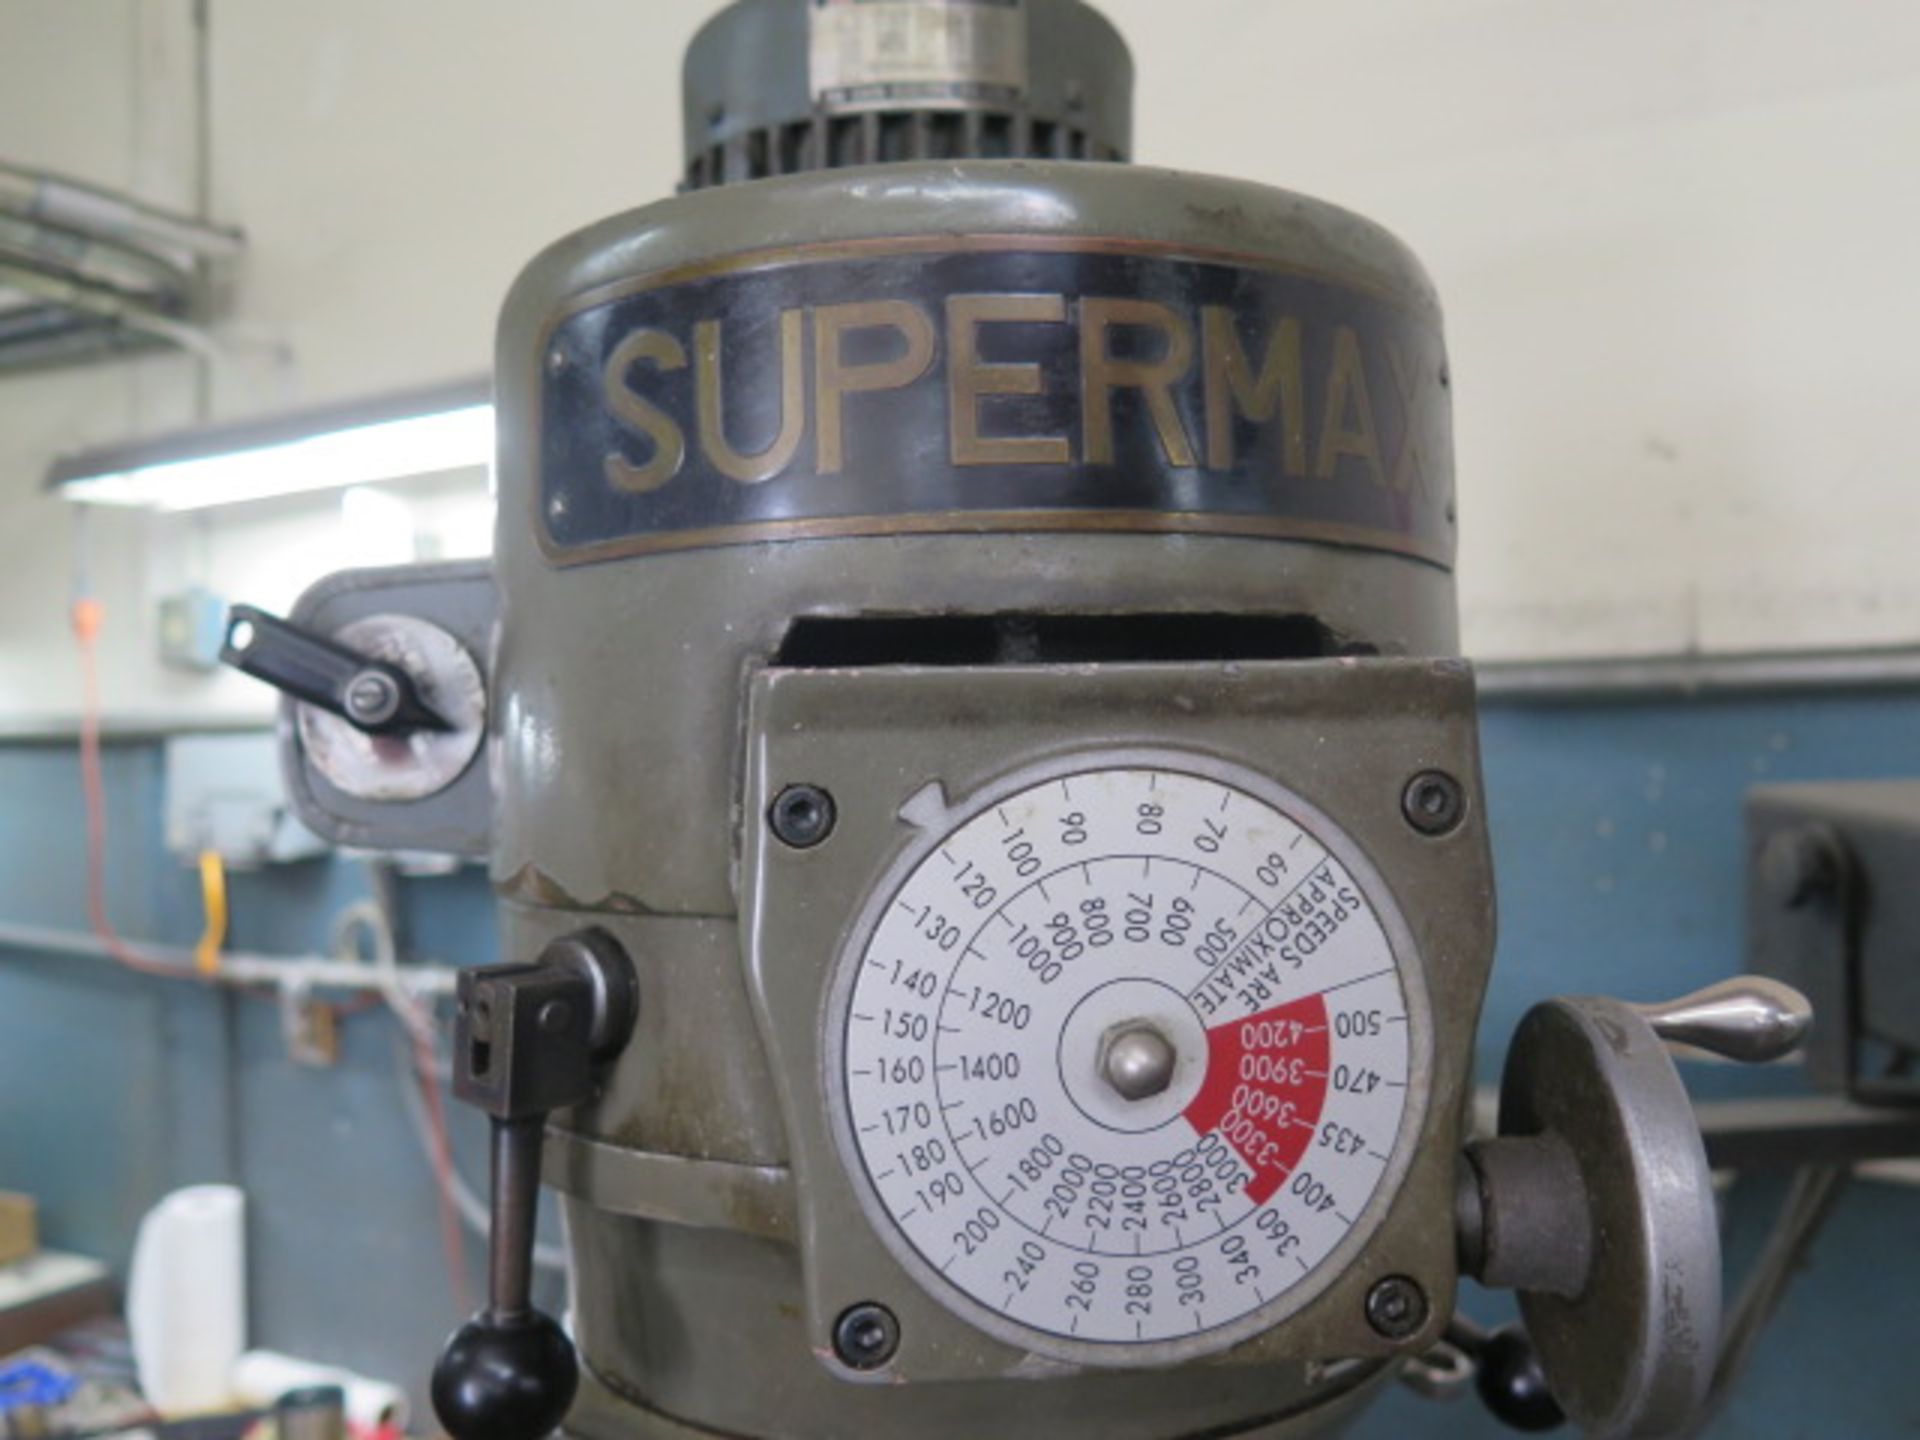 Supermax Vertical Mill w/ DRO, 60-4200 Dial Change RPM, Power Feed, Trava-Dials (SOLD AS-IS - NO - Image 8 of 8